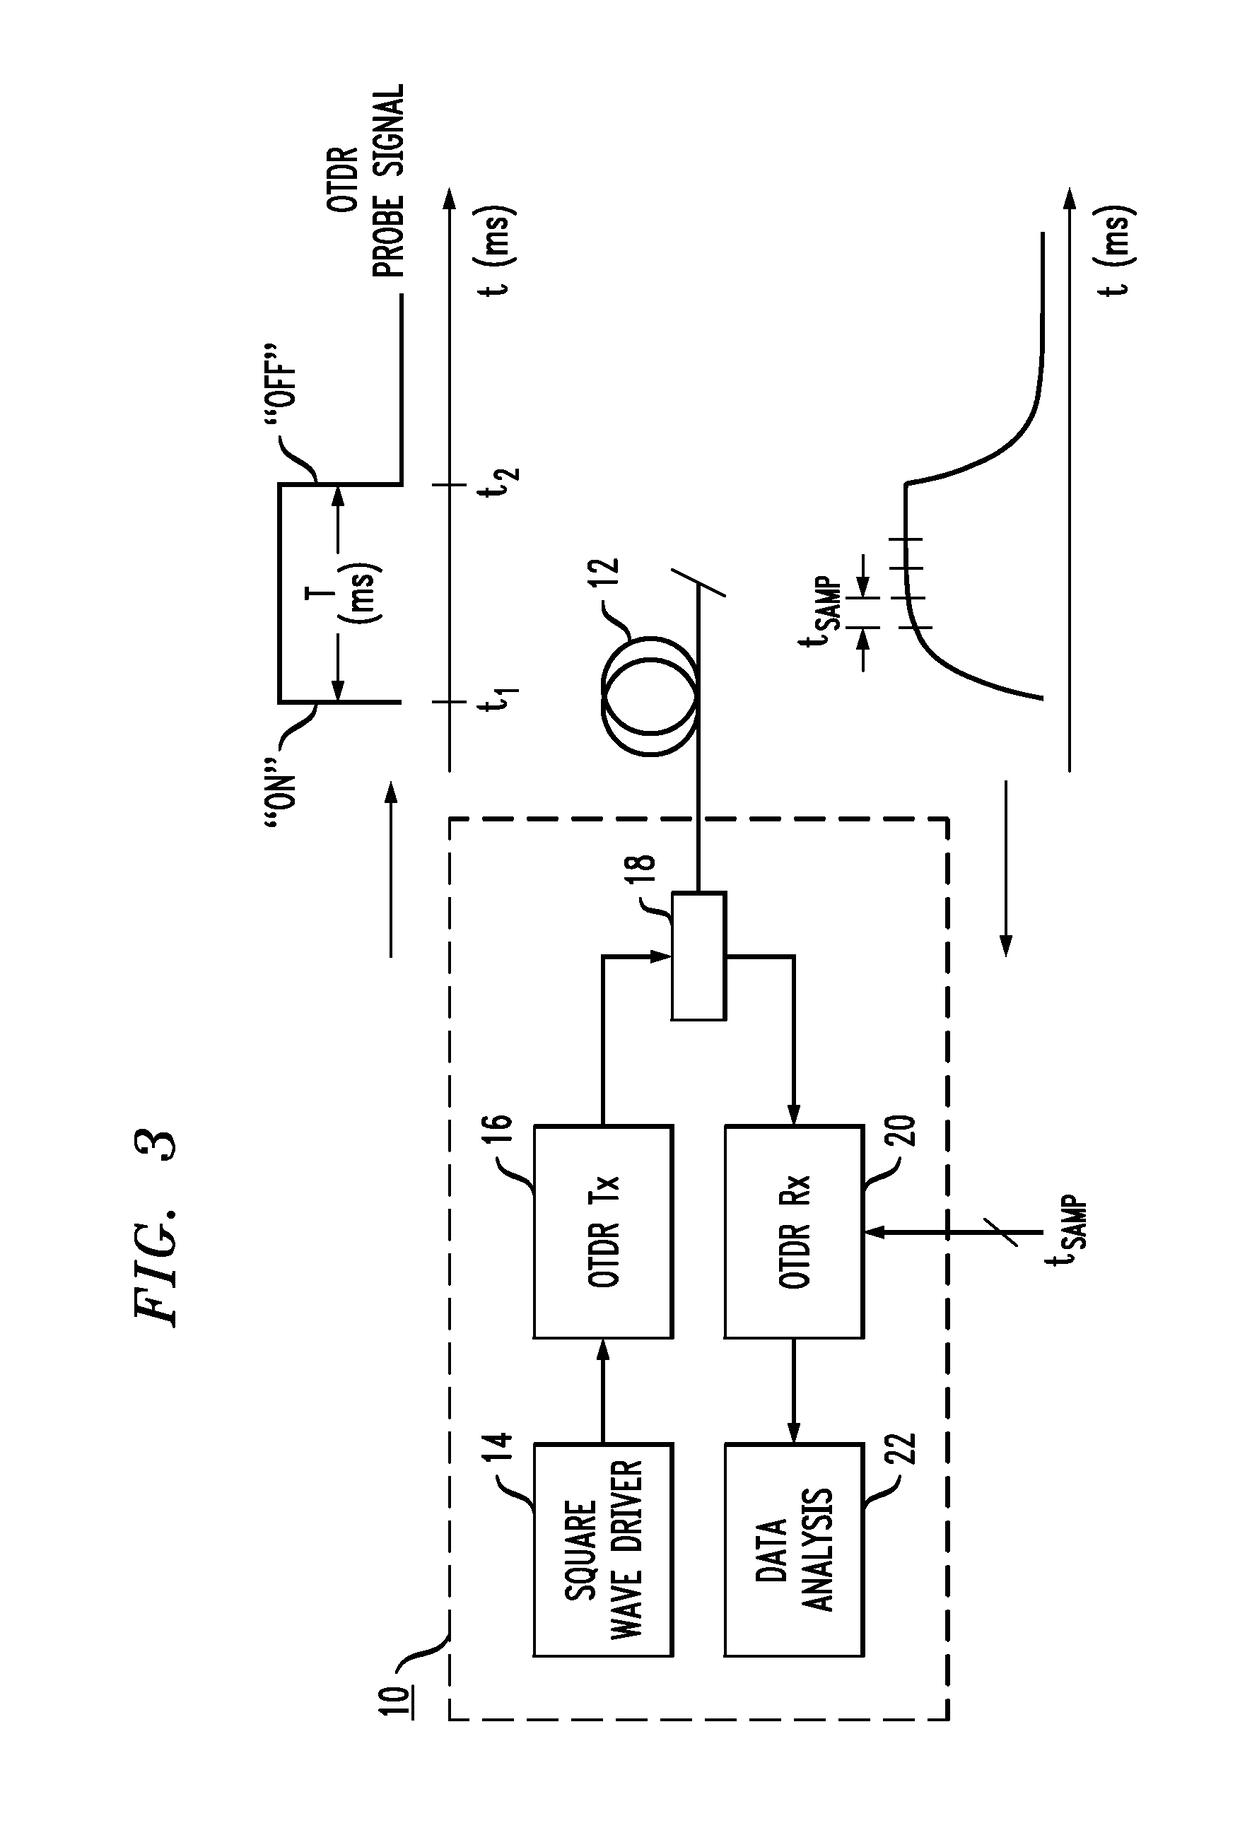 Edge propagating optical time domain reflectometer and method of using the same